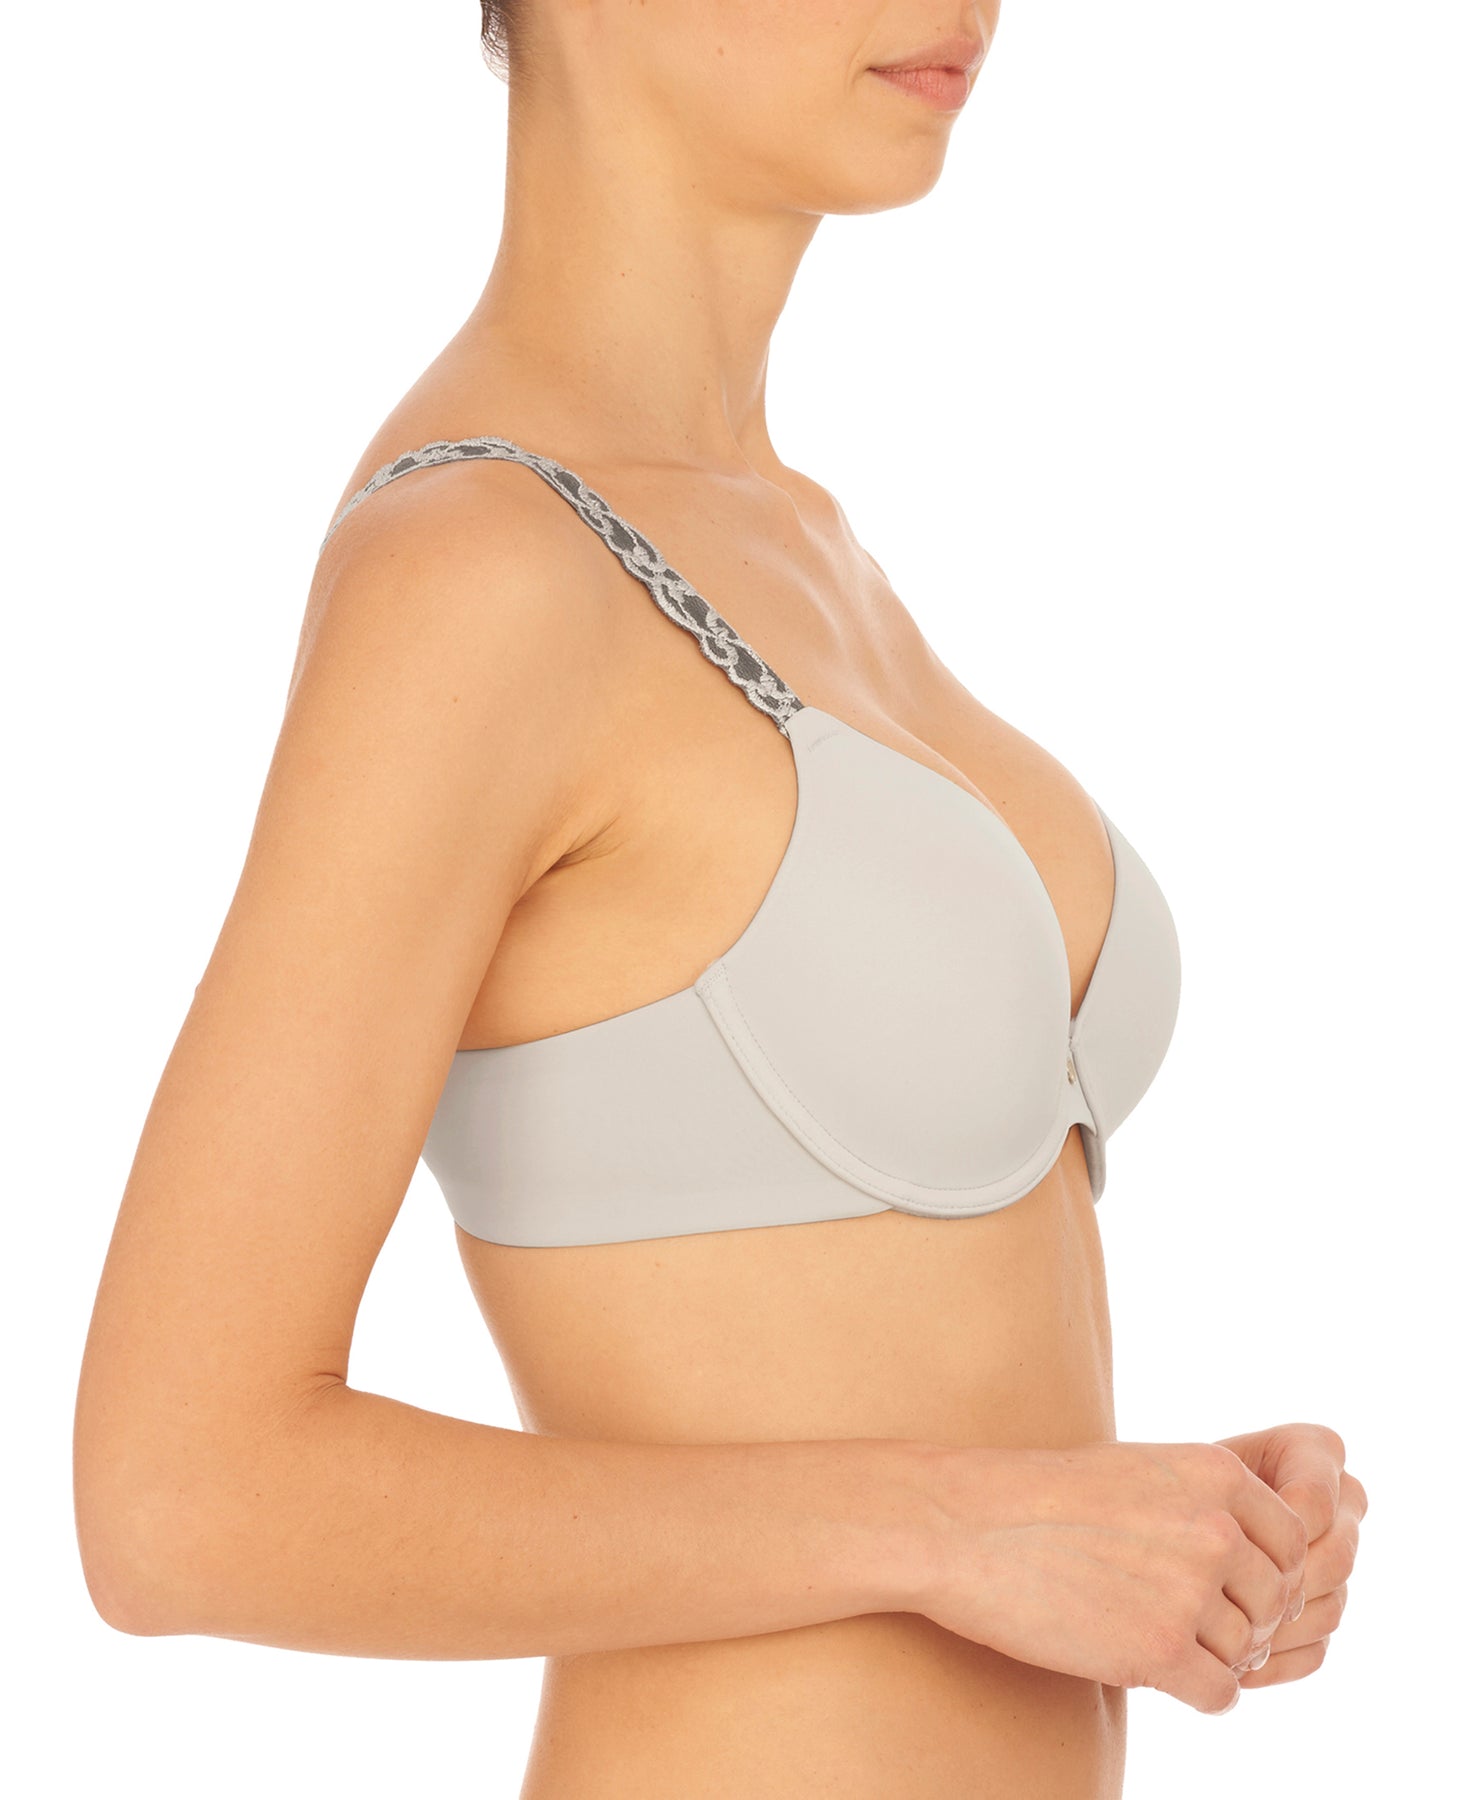 Pure Luxe Full Fit Bra in Cafe by Natori – My Bare Essentials